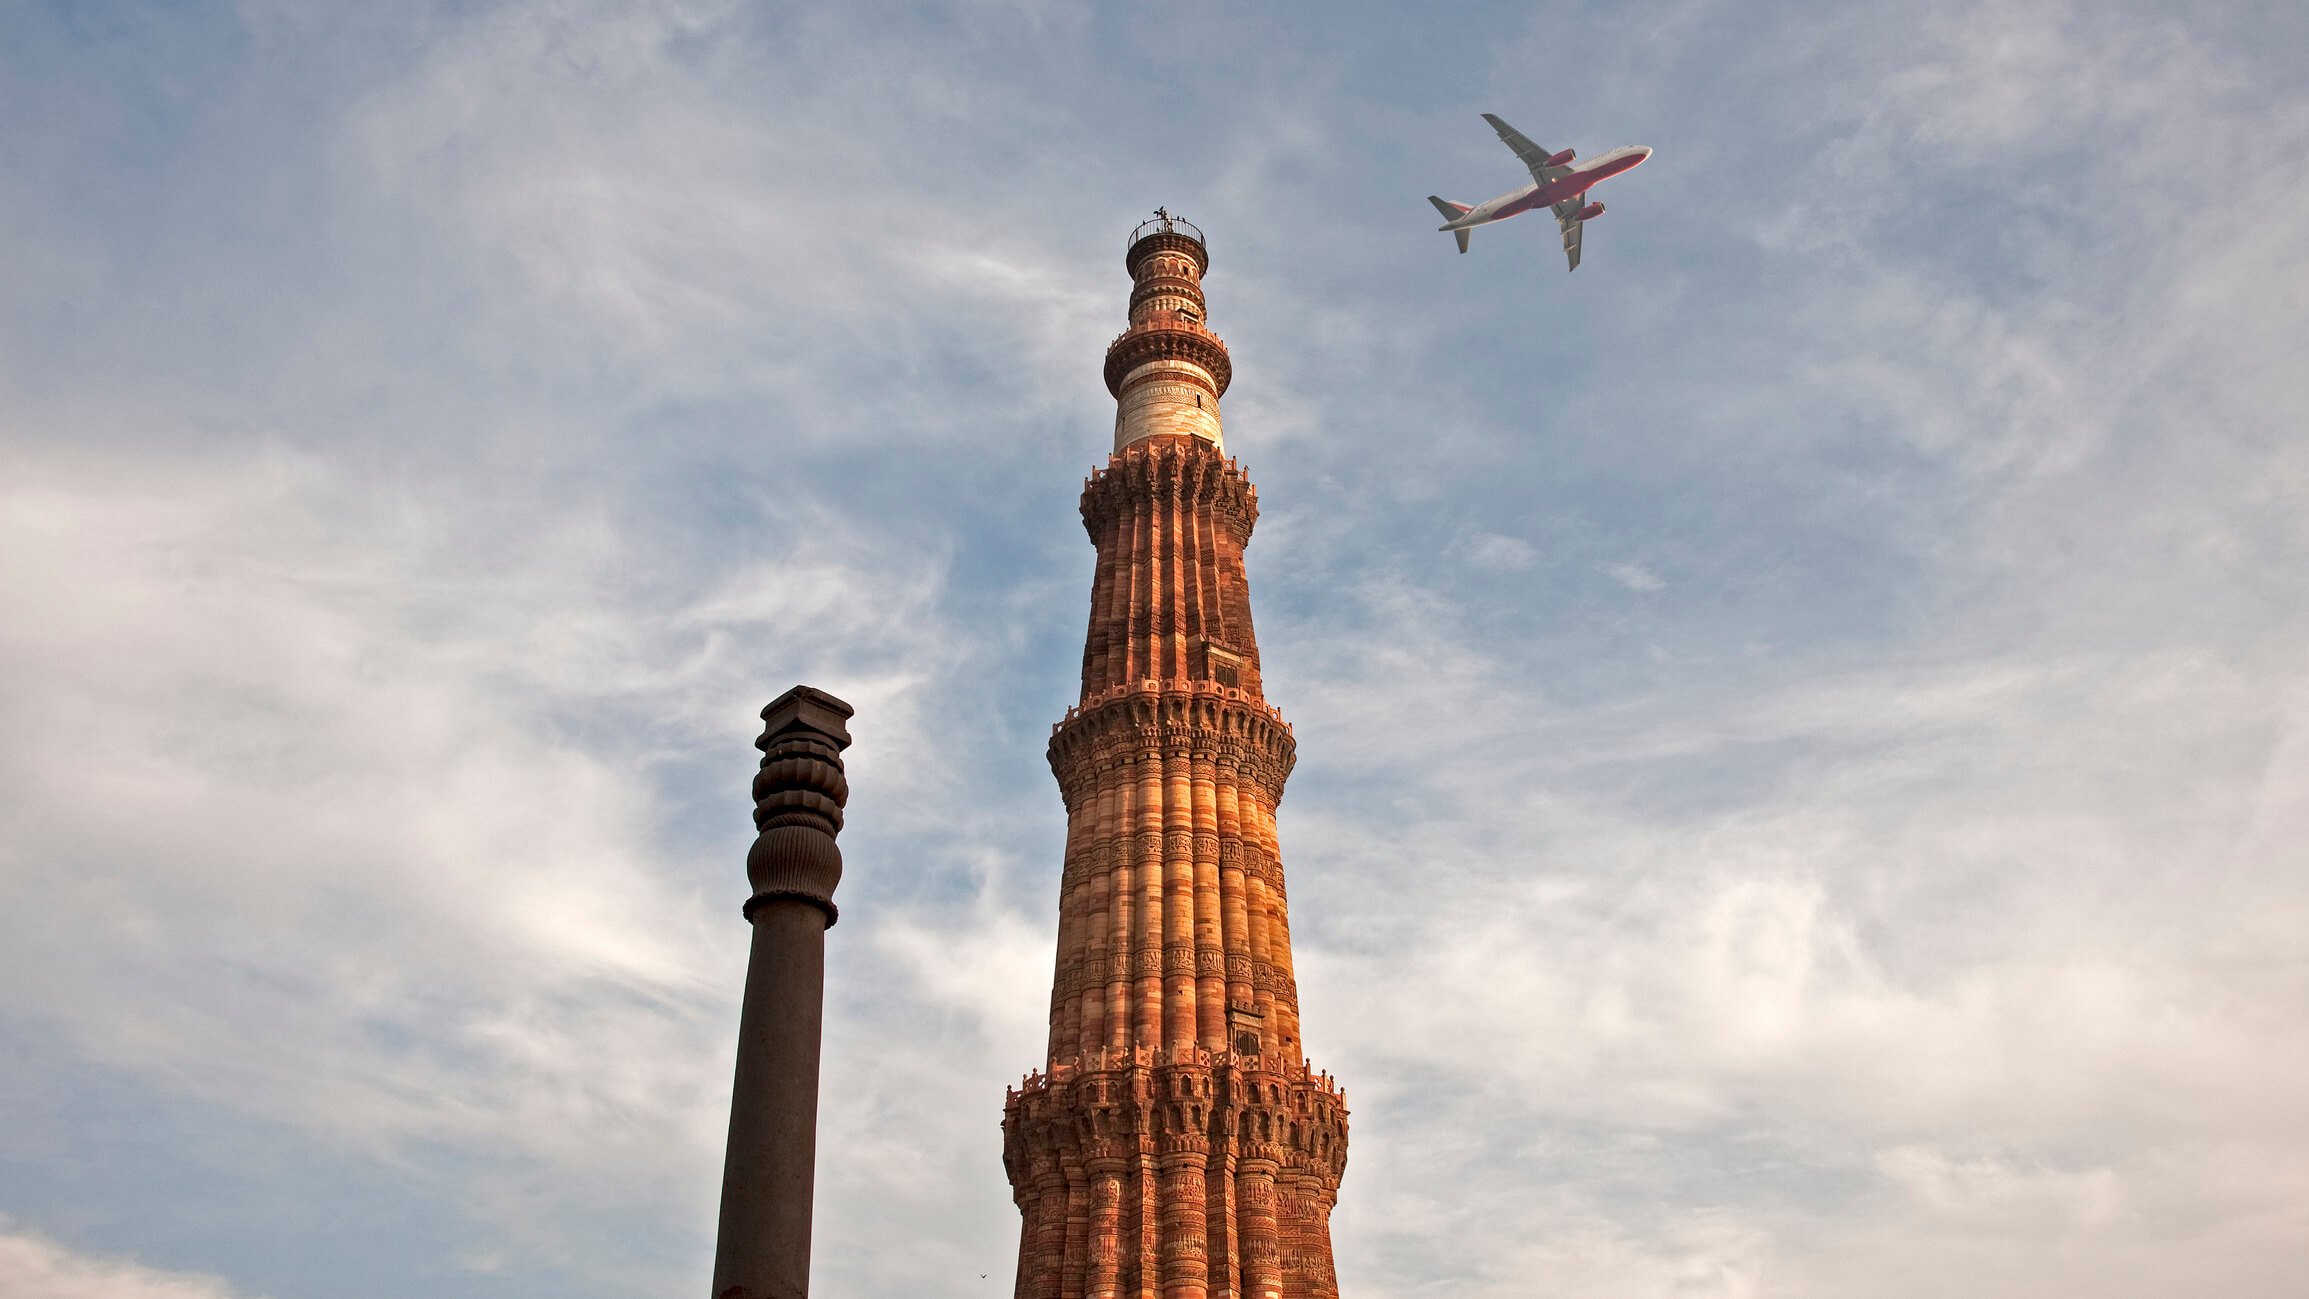 India’s aviation sector is set to soar. Here’s why.